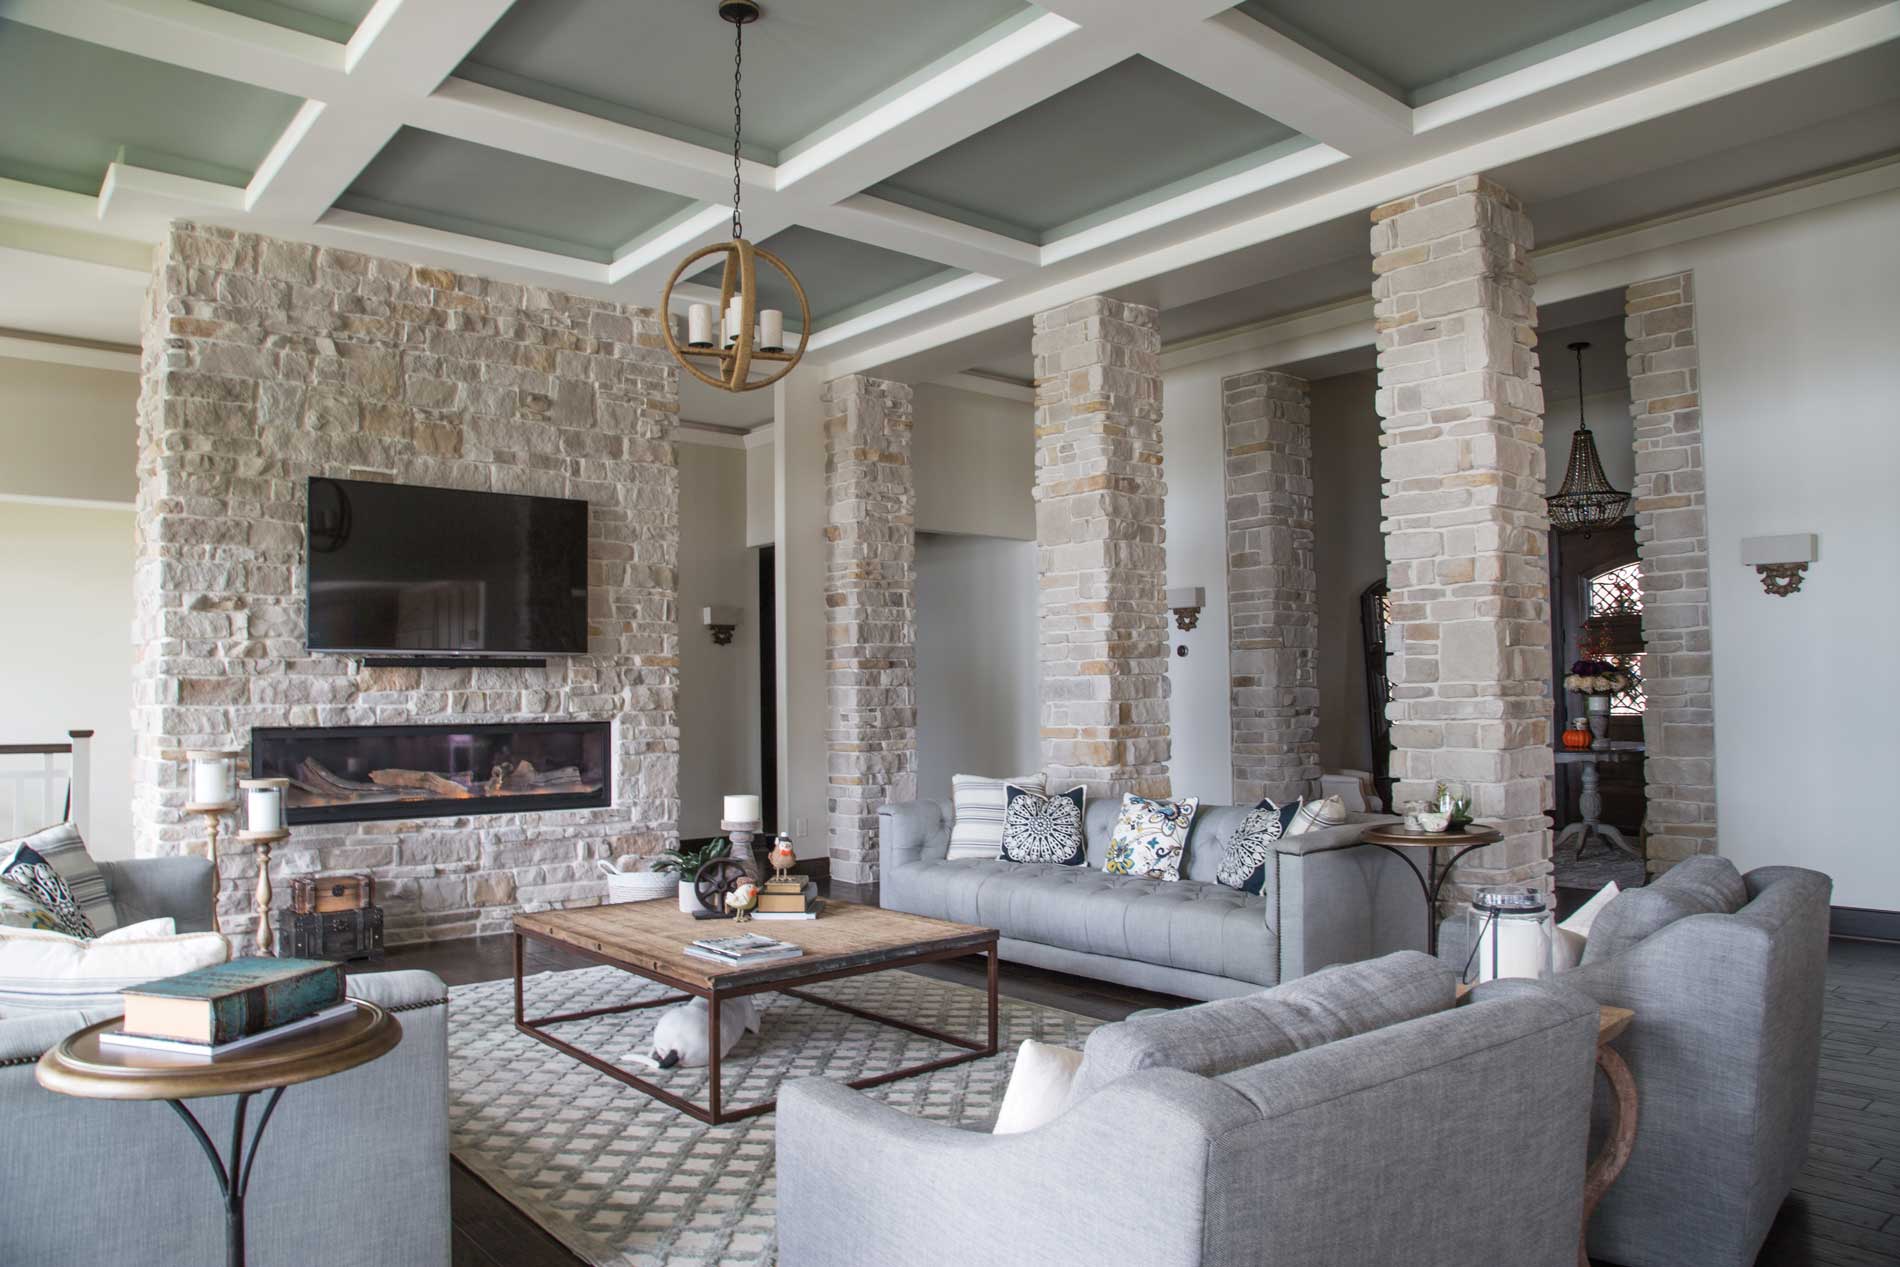 A living room featuring a fireplace and columns made with Bianco Blend